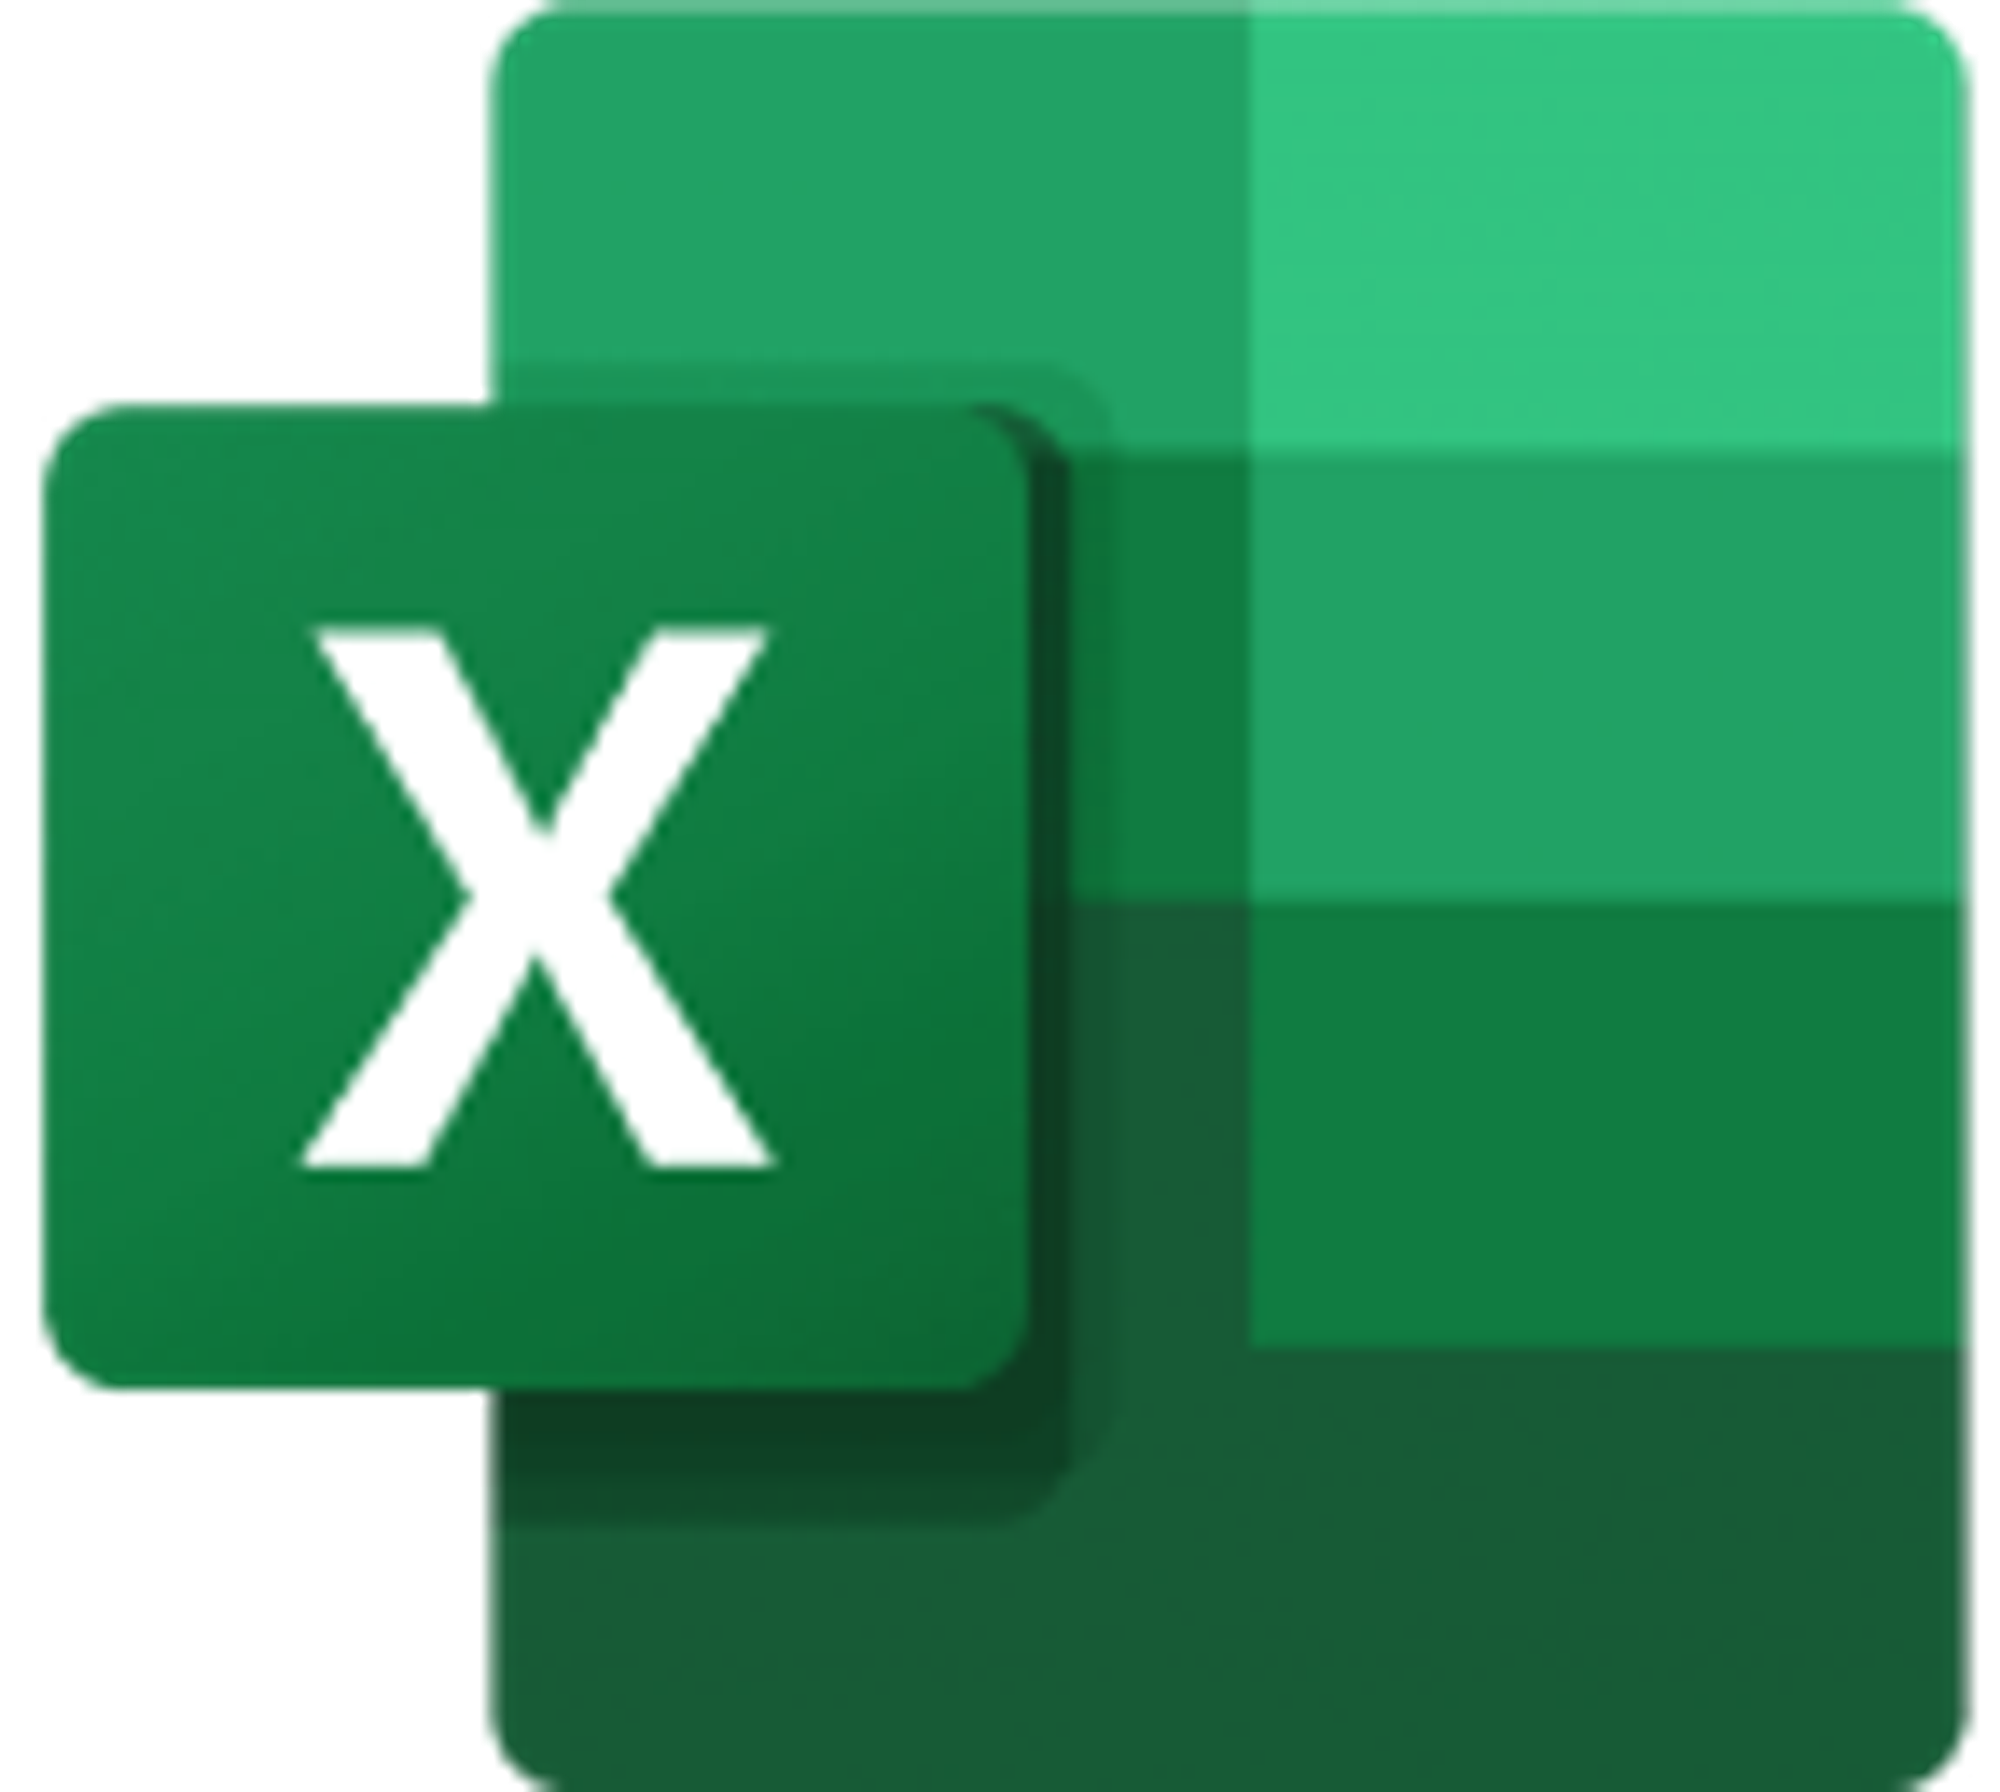 Add Microsoft 365 Excel worksheet rows for new Tally responses